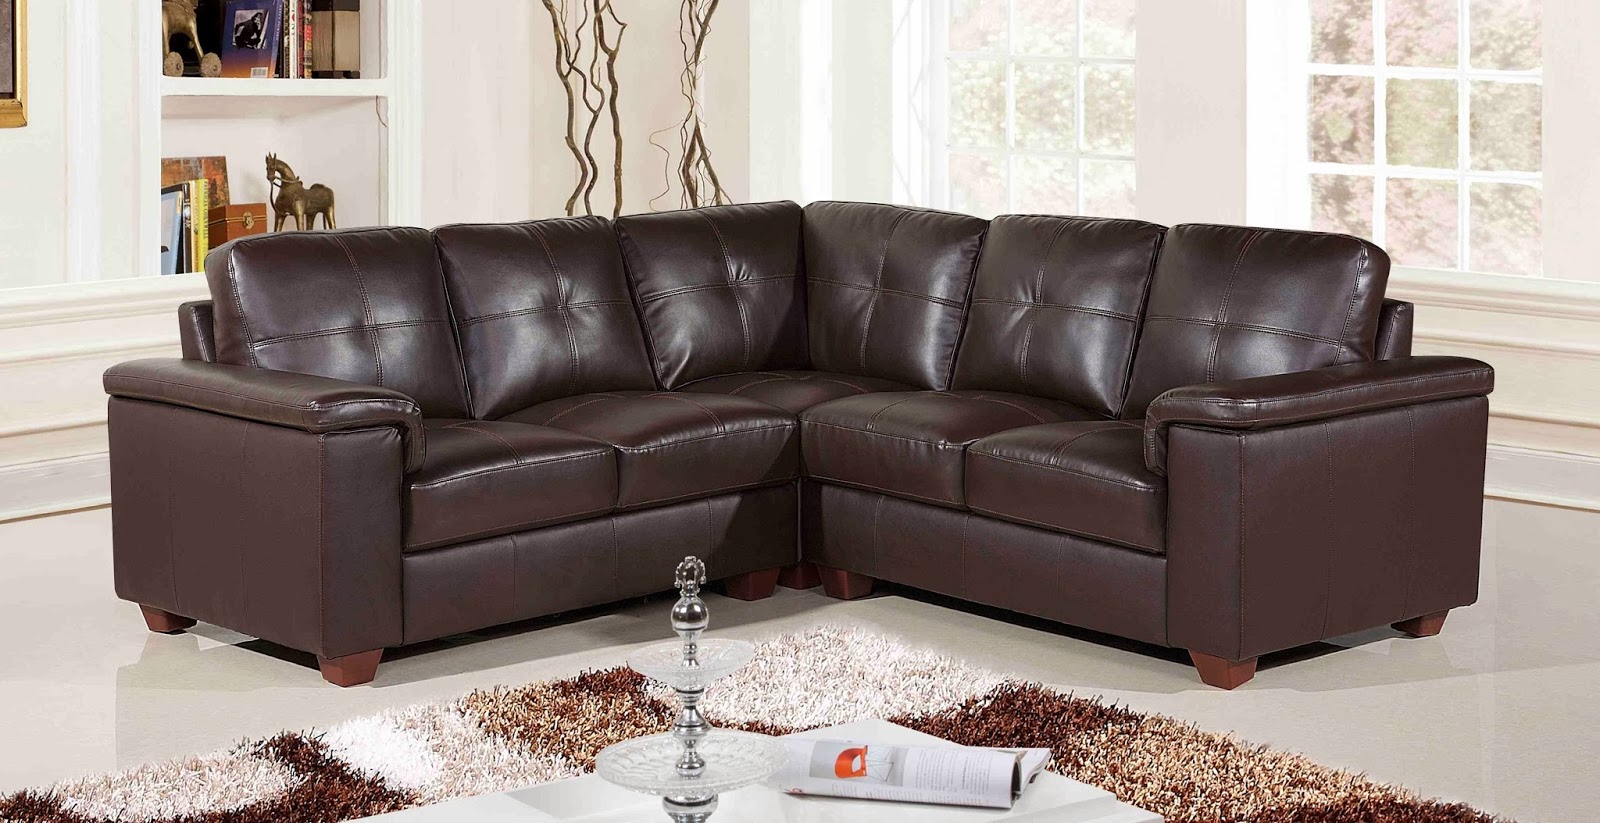 Find The Best Leather Sofas And Furniture Affordable Leather Corner Sofas For Your Home And Office